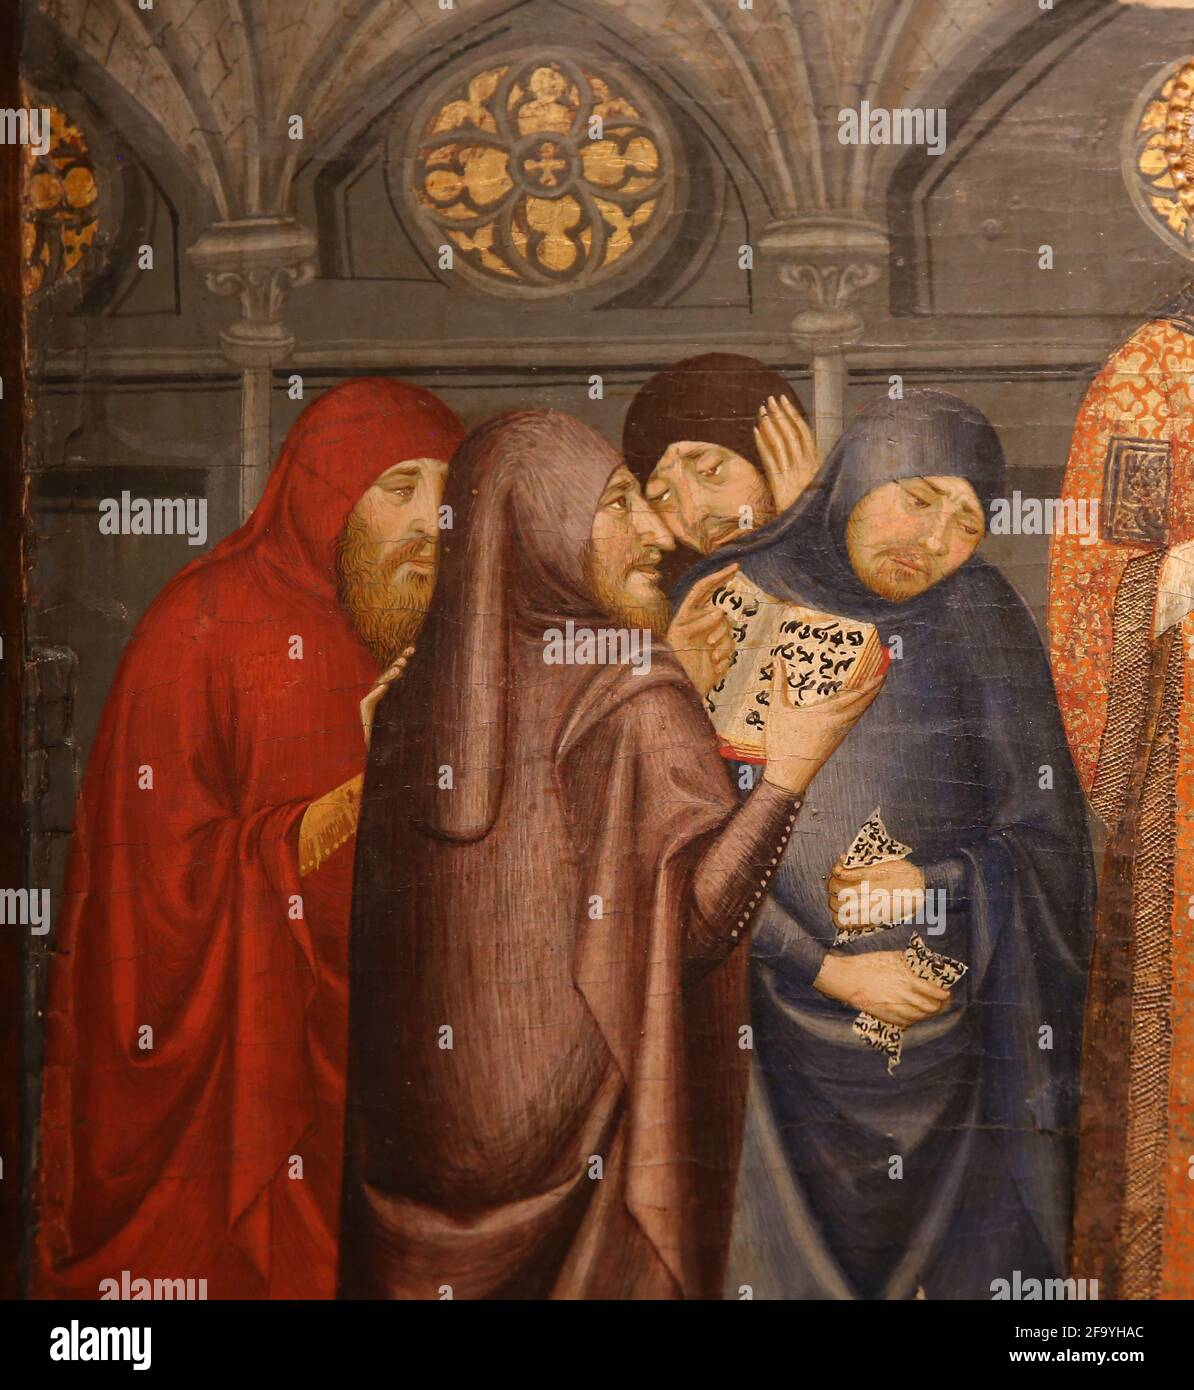 Altarpiece of St Stephen by Jaume Serra. C. 1385. Monastery of St. Maria de Gualter. The dispote with the jews. Detail of jews. National Art Museum of Stock Photo